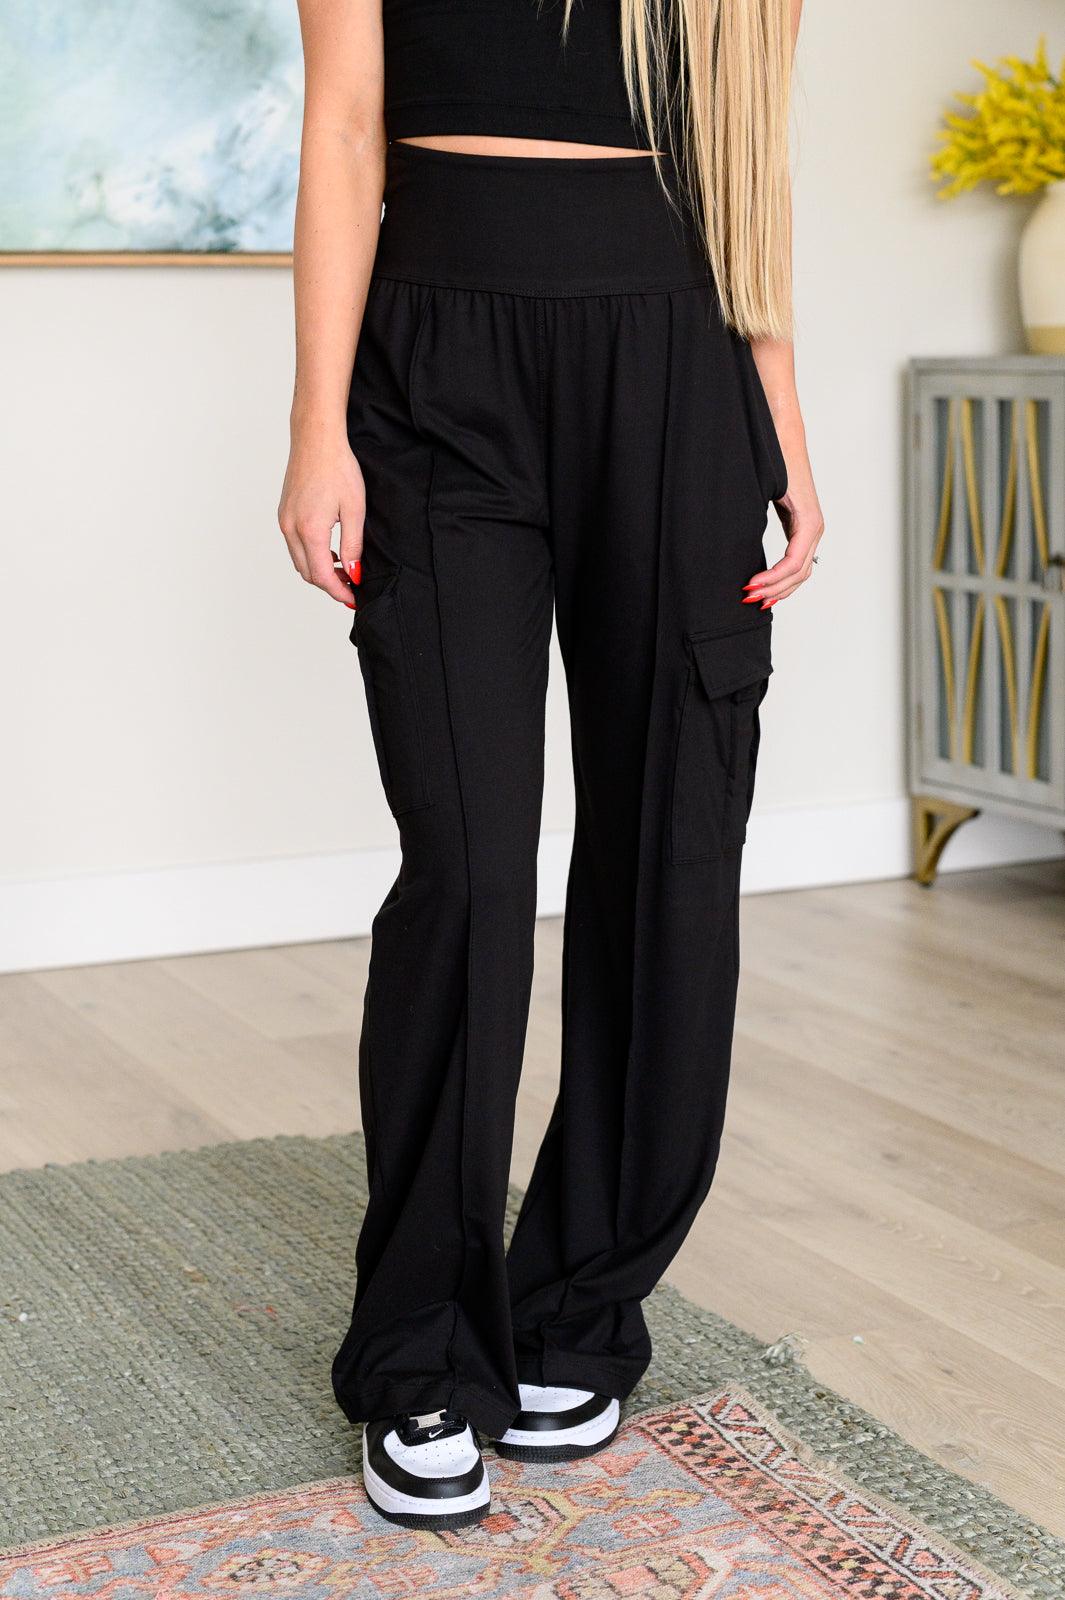 Race to Relax Cargo Pants in Black Small Athleisure Pants